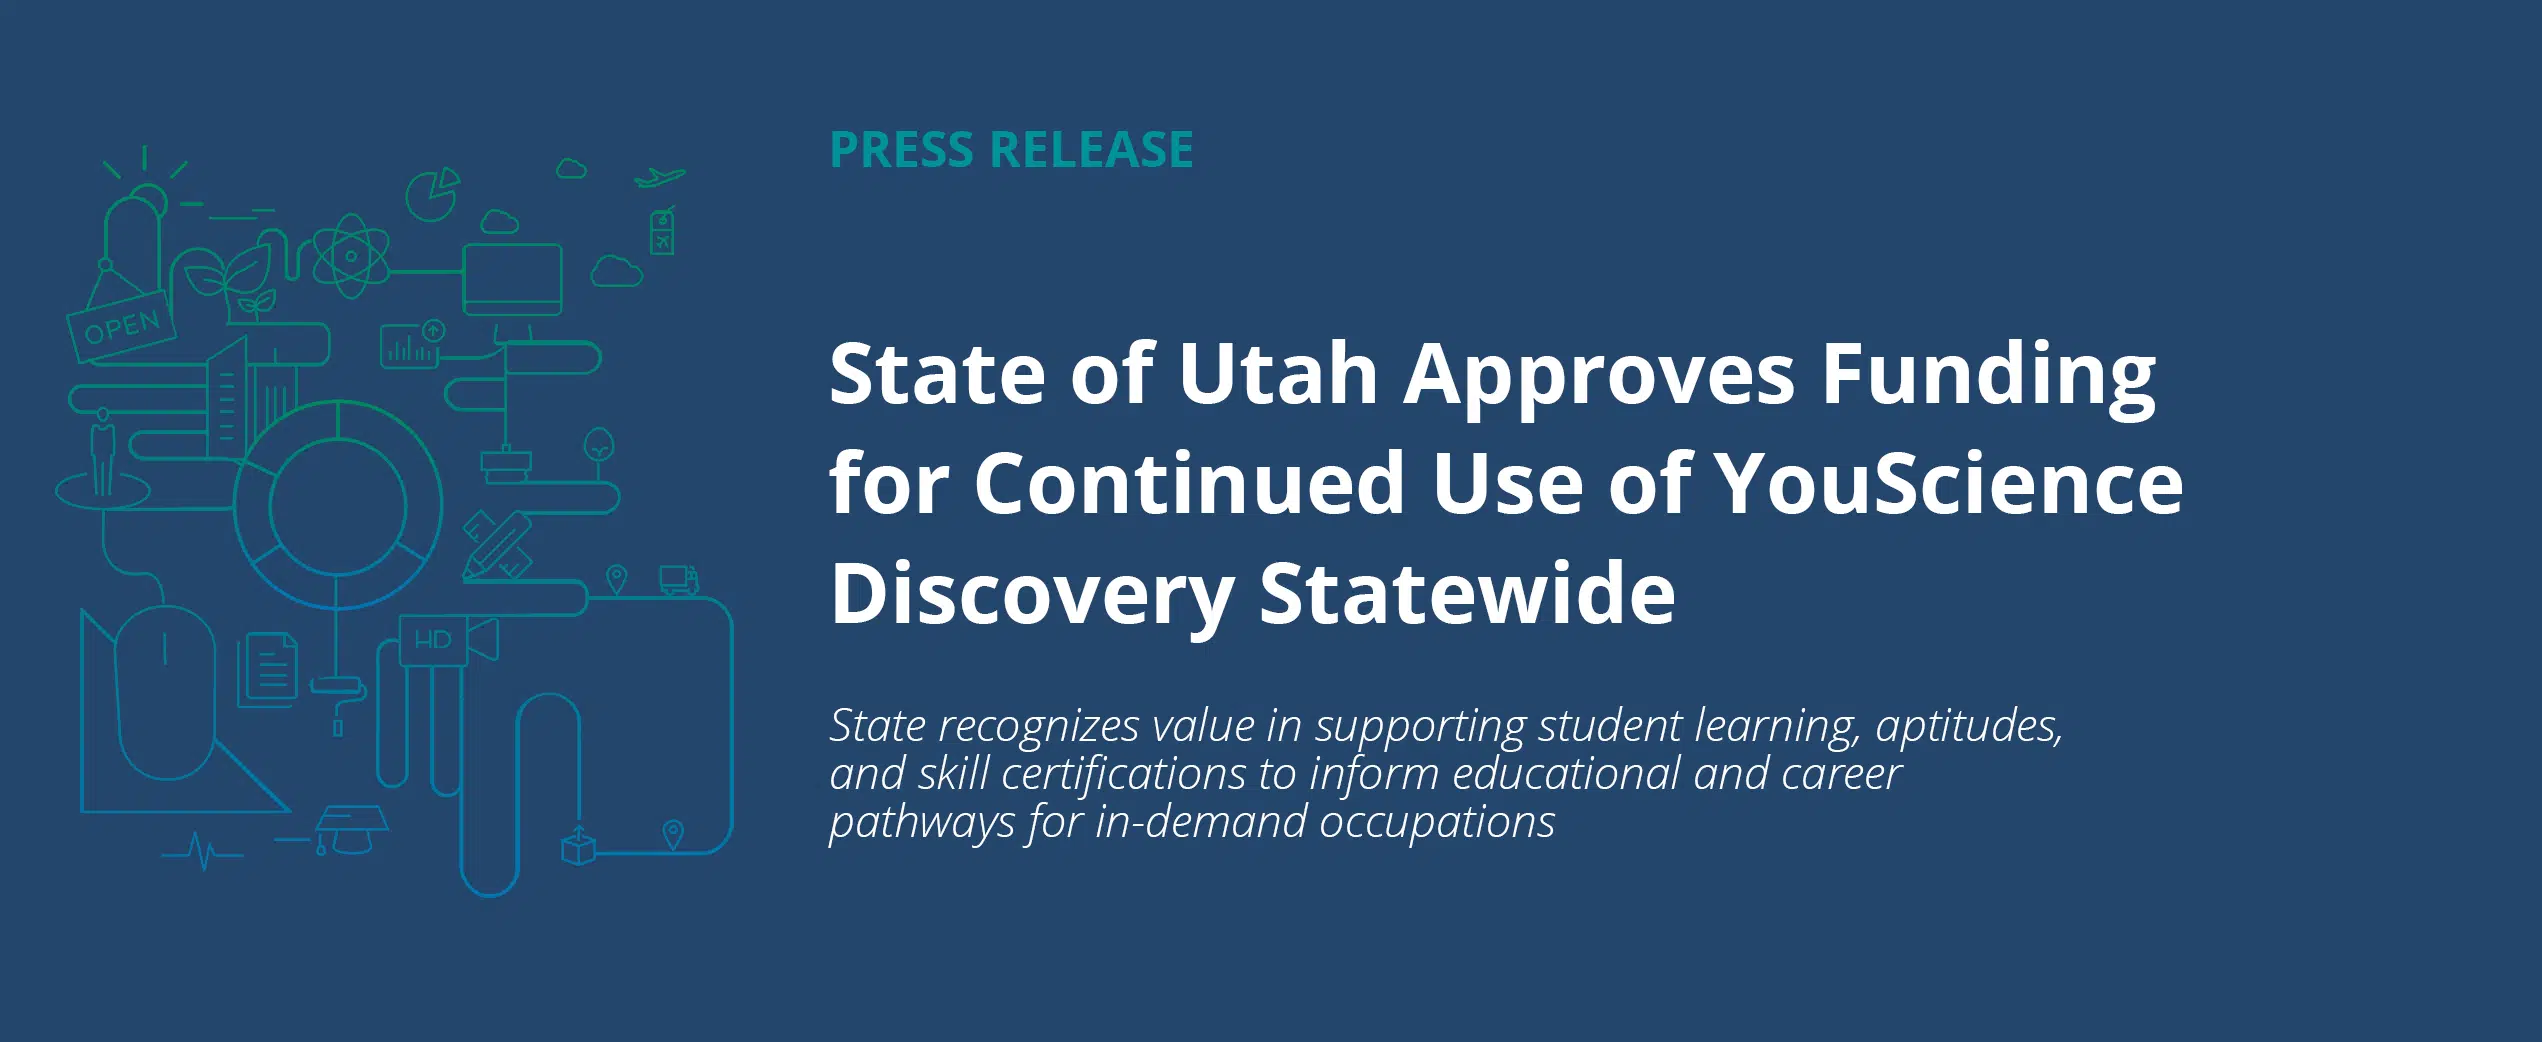 State of Utah approves funding for continued use of YouScience Discovery statewide